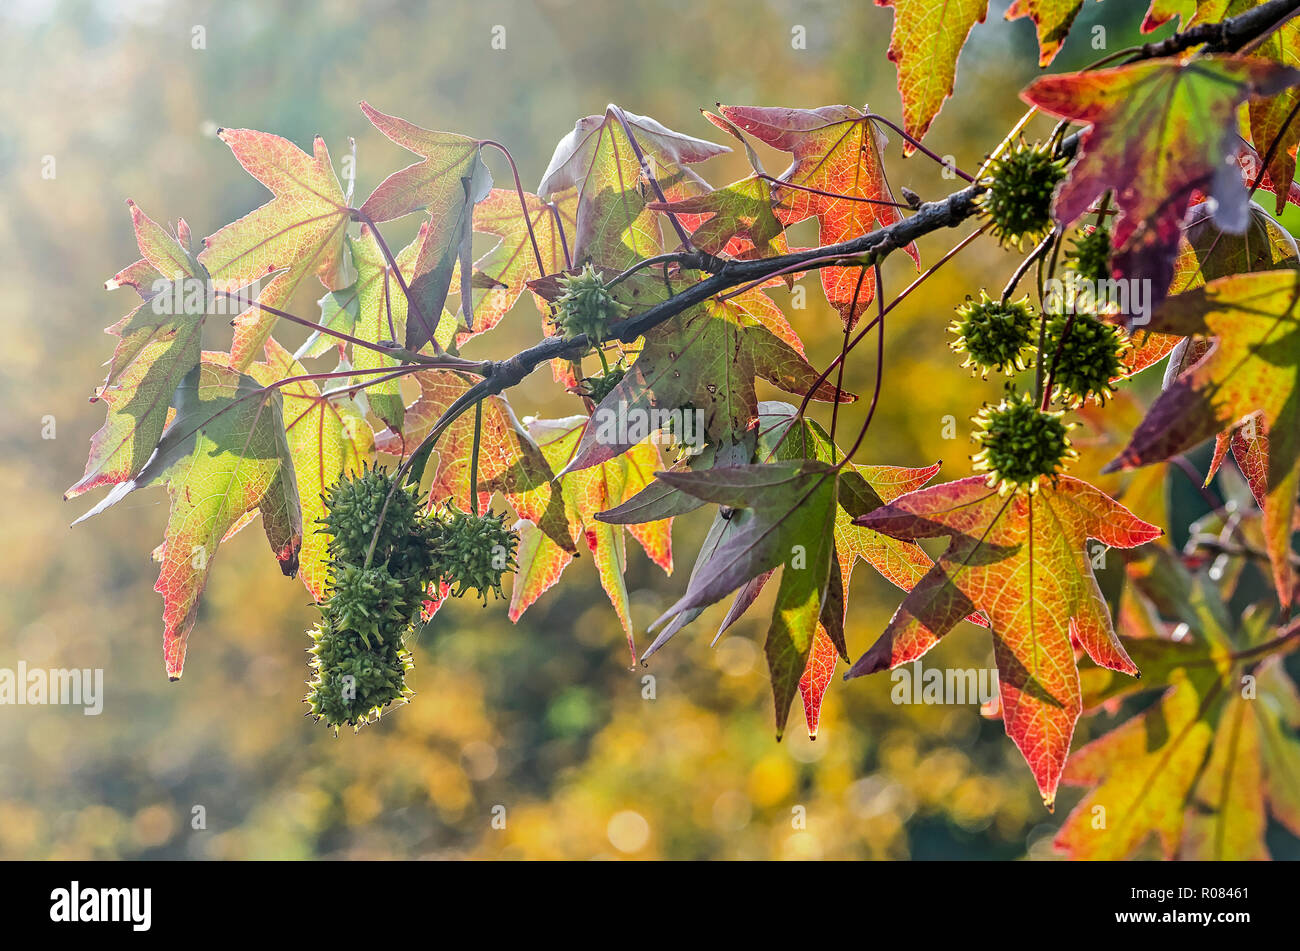 Bright sunlight shining on a branch of a sweet gum tree (liquidambar styraciflua) in autumn with colorful star-shaped leaves and green spiky fruits Stock Photo